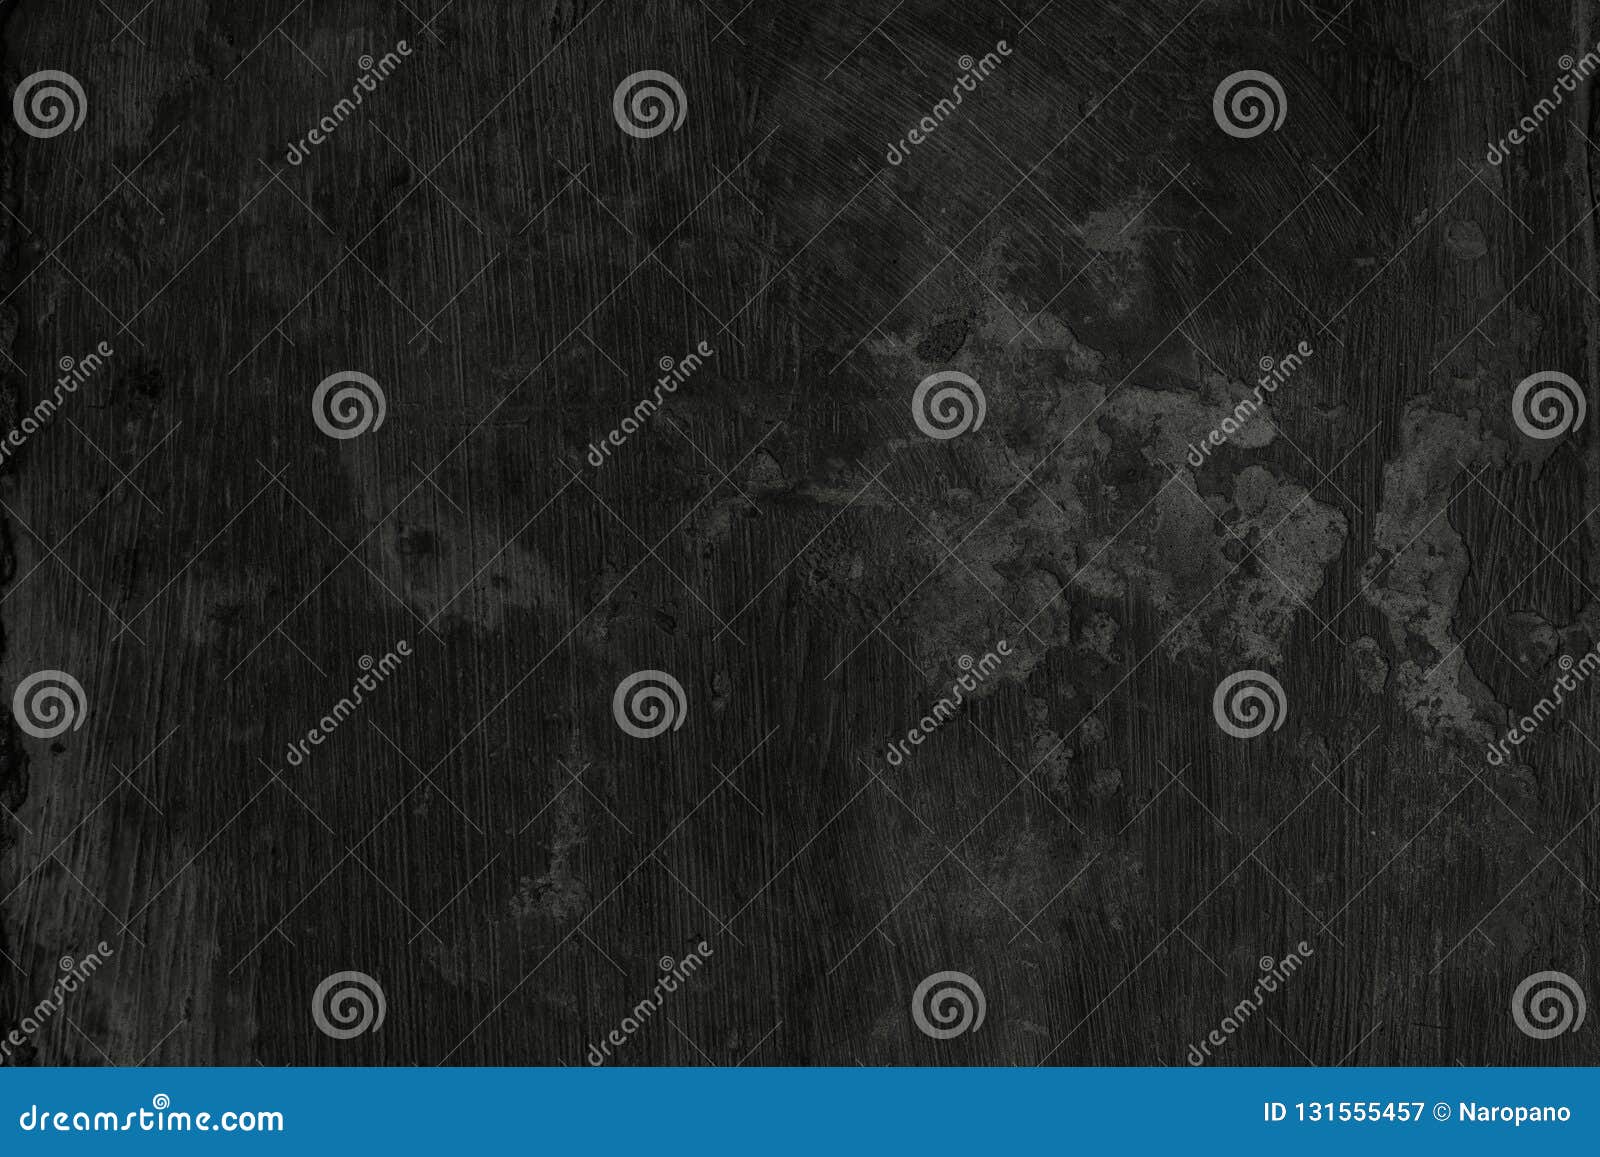 Cement Scratch Background. Texture Placed Over an Object To Create a